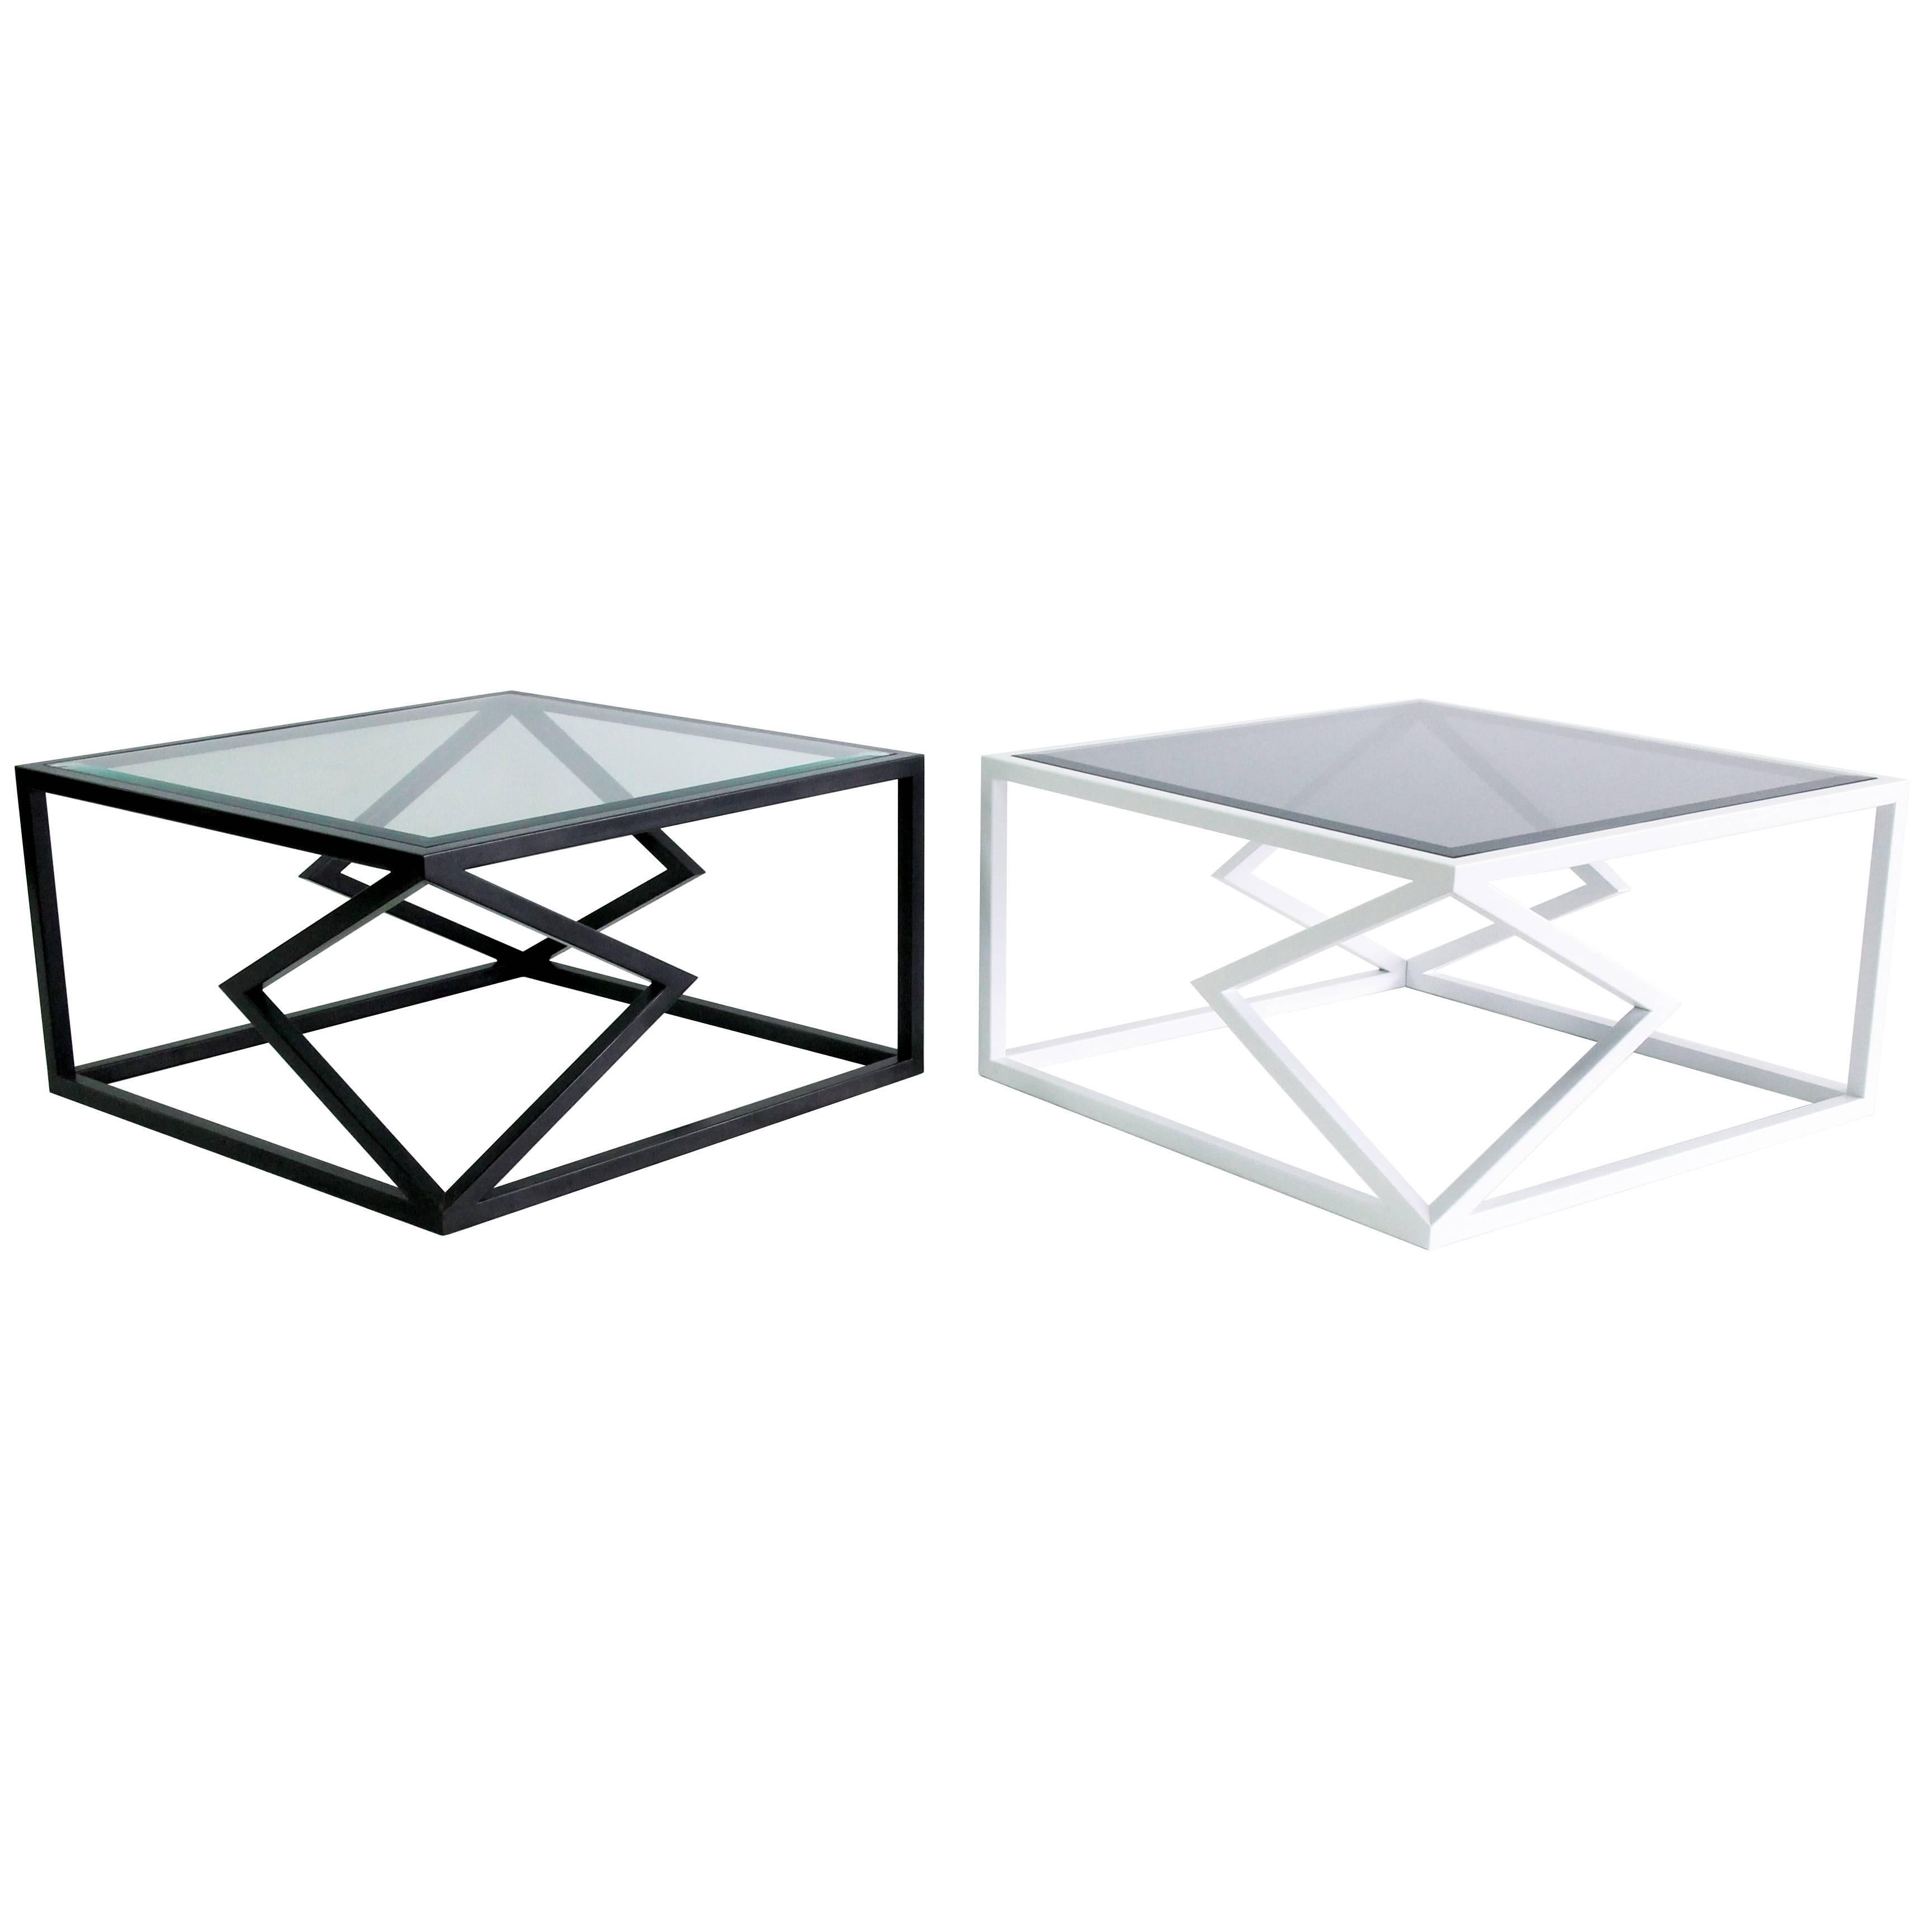 The “Two Diamonds” cocktail table is from the 2016 collection of Alex Drew & No One. Inspired by traditional craftsmanship while incorporating a modern edge, AD&NO's work plays on light, textures, and form.

Each piece is handcrafted by Alex